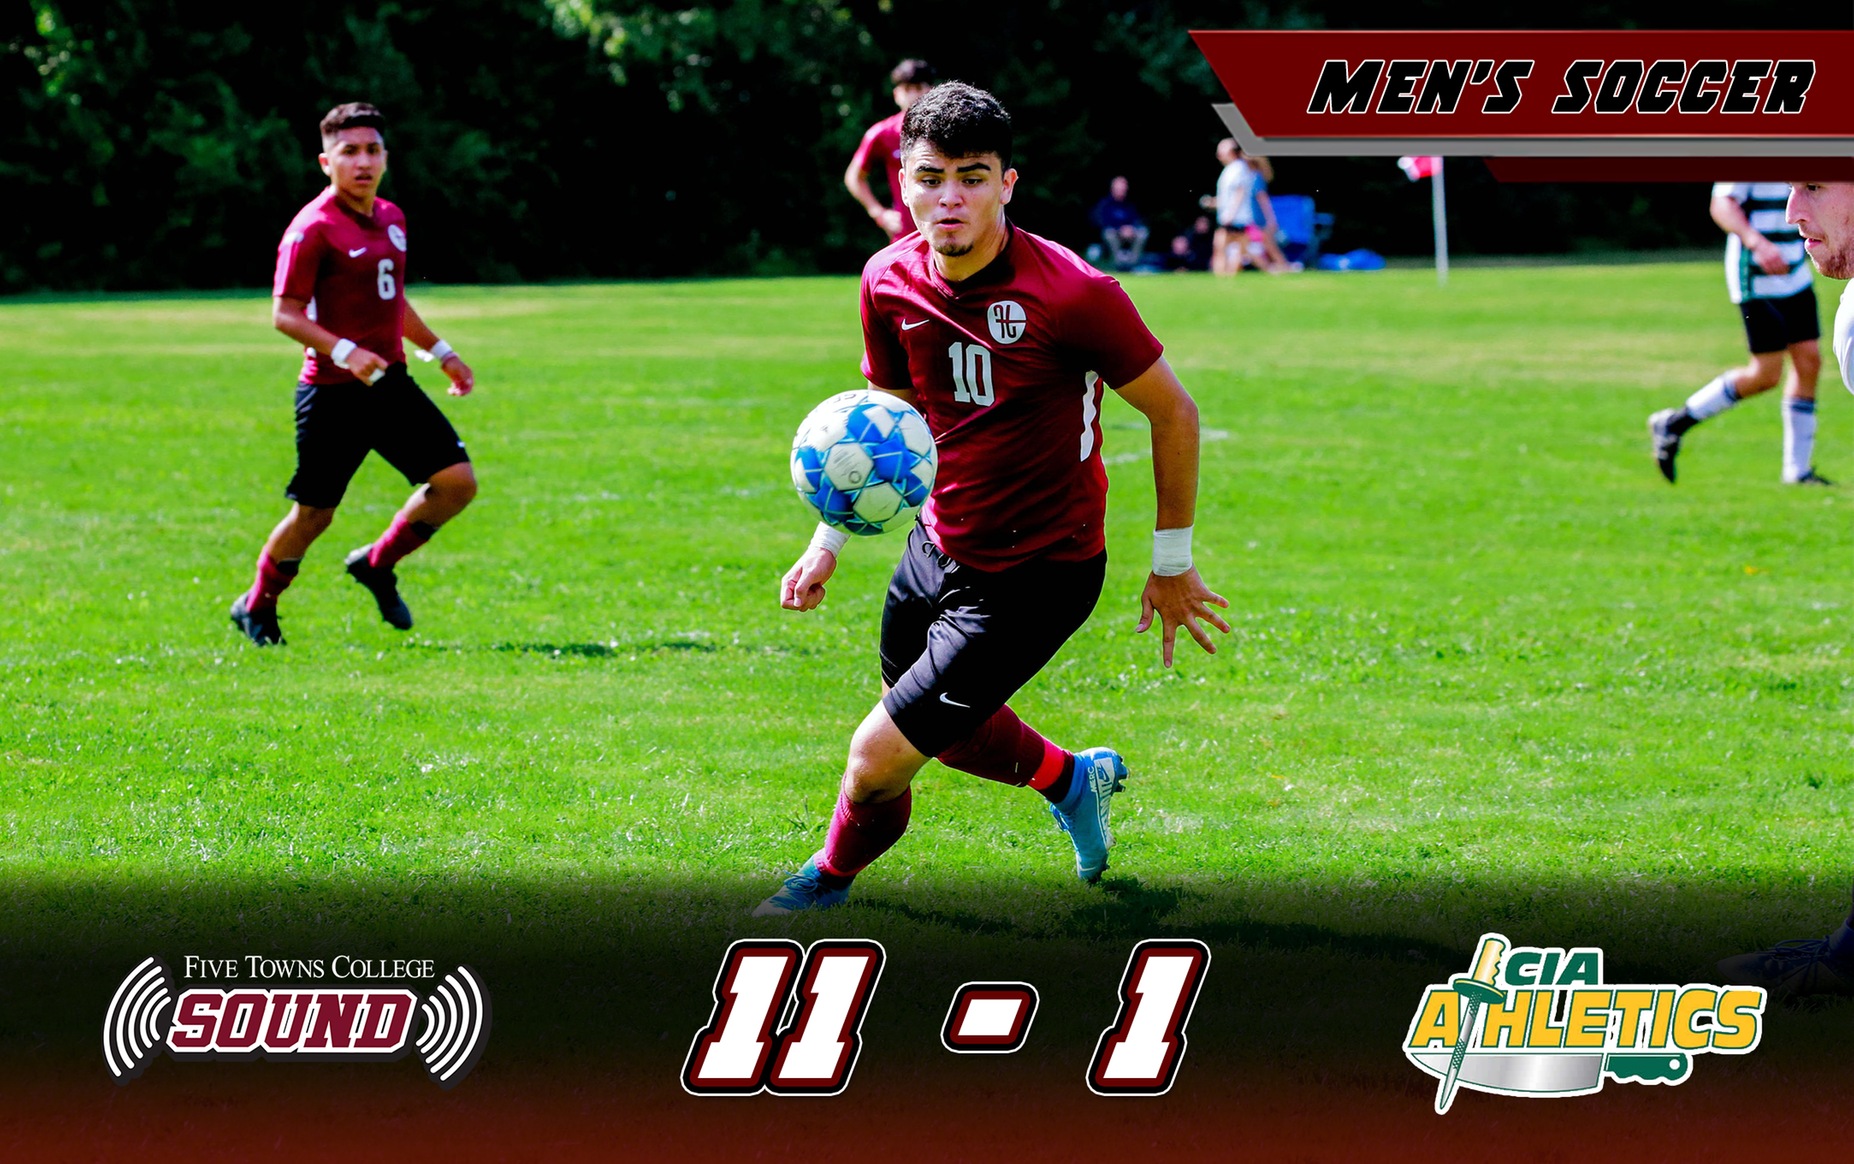 Men's Soccer: Five Towns 11, Culinary 1